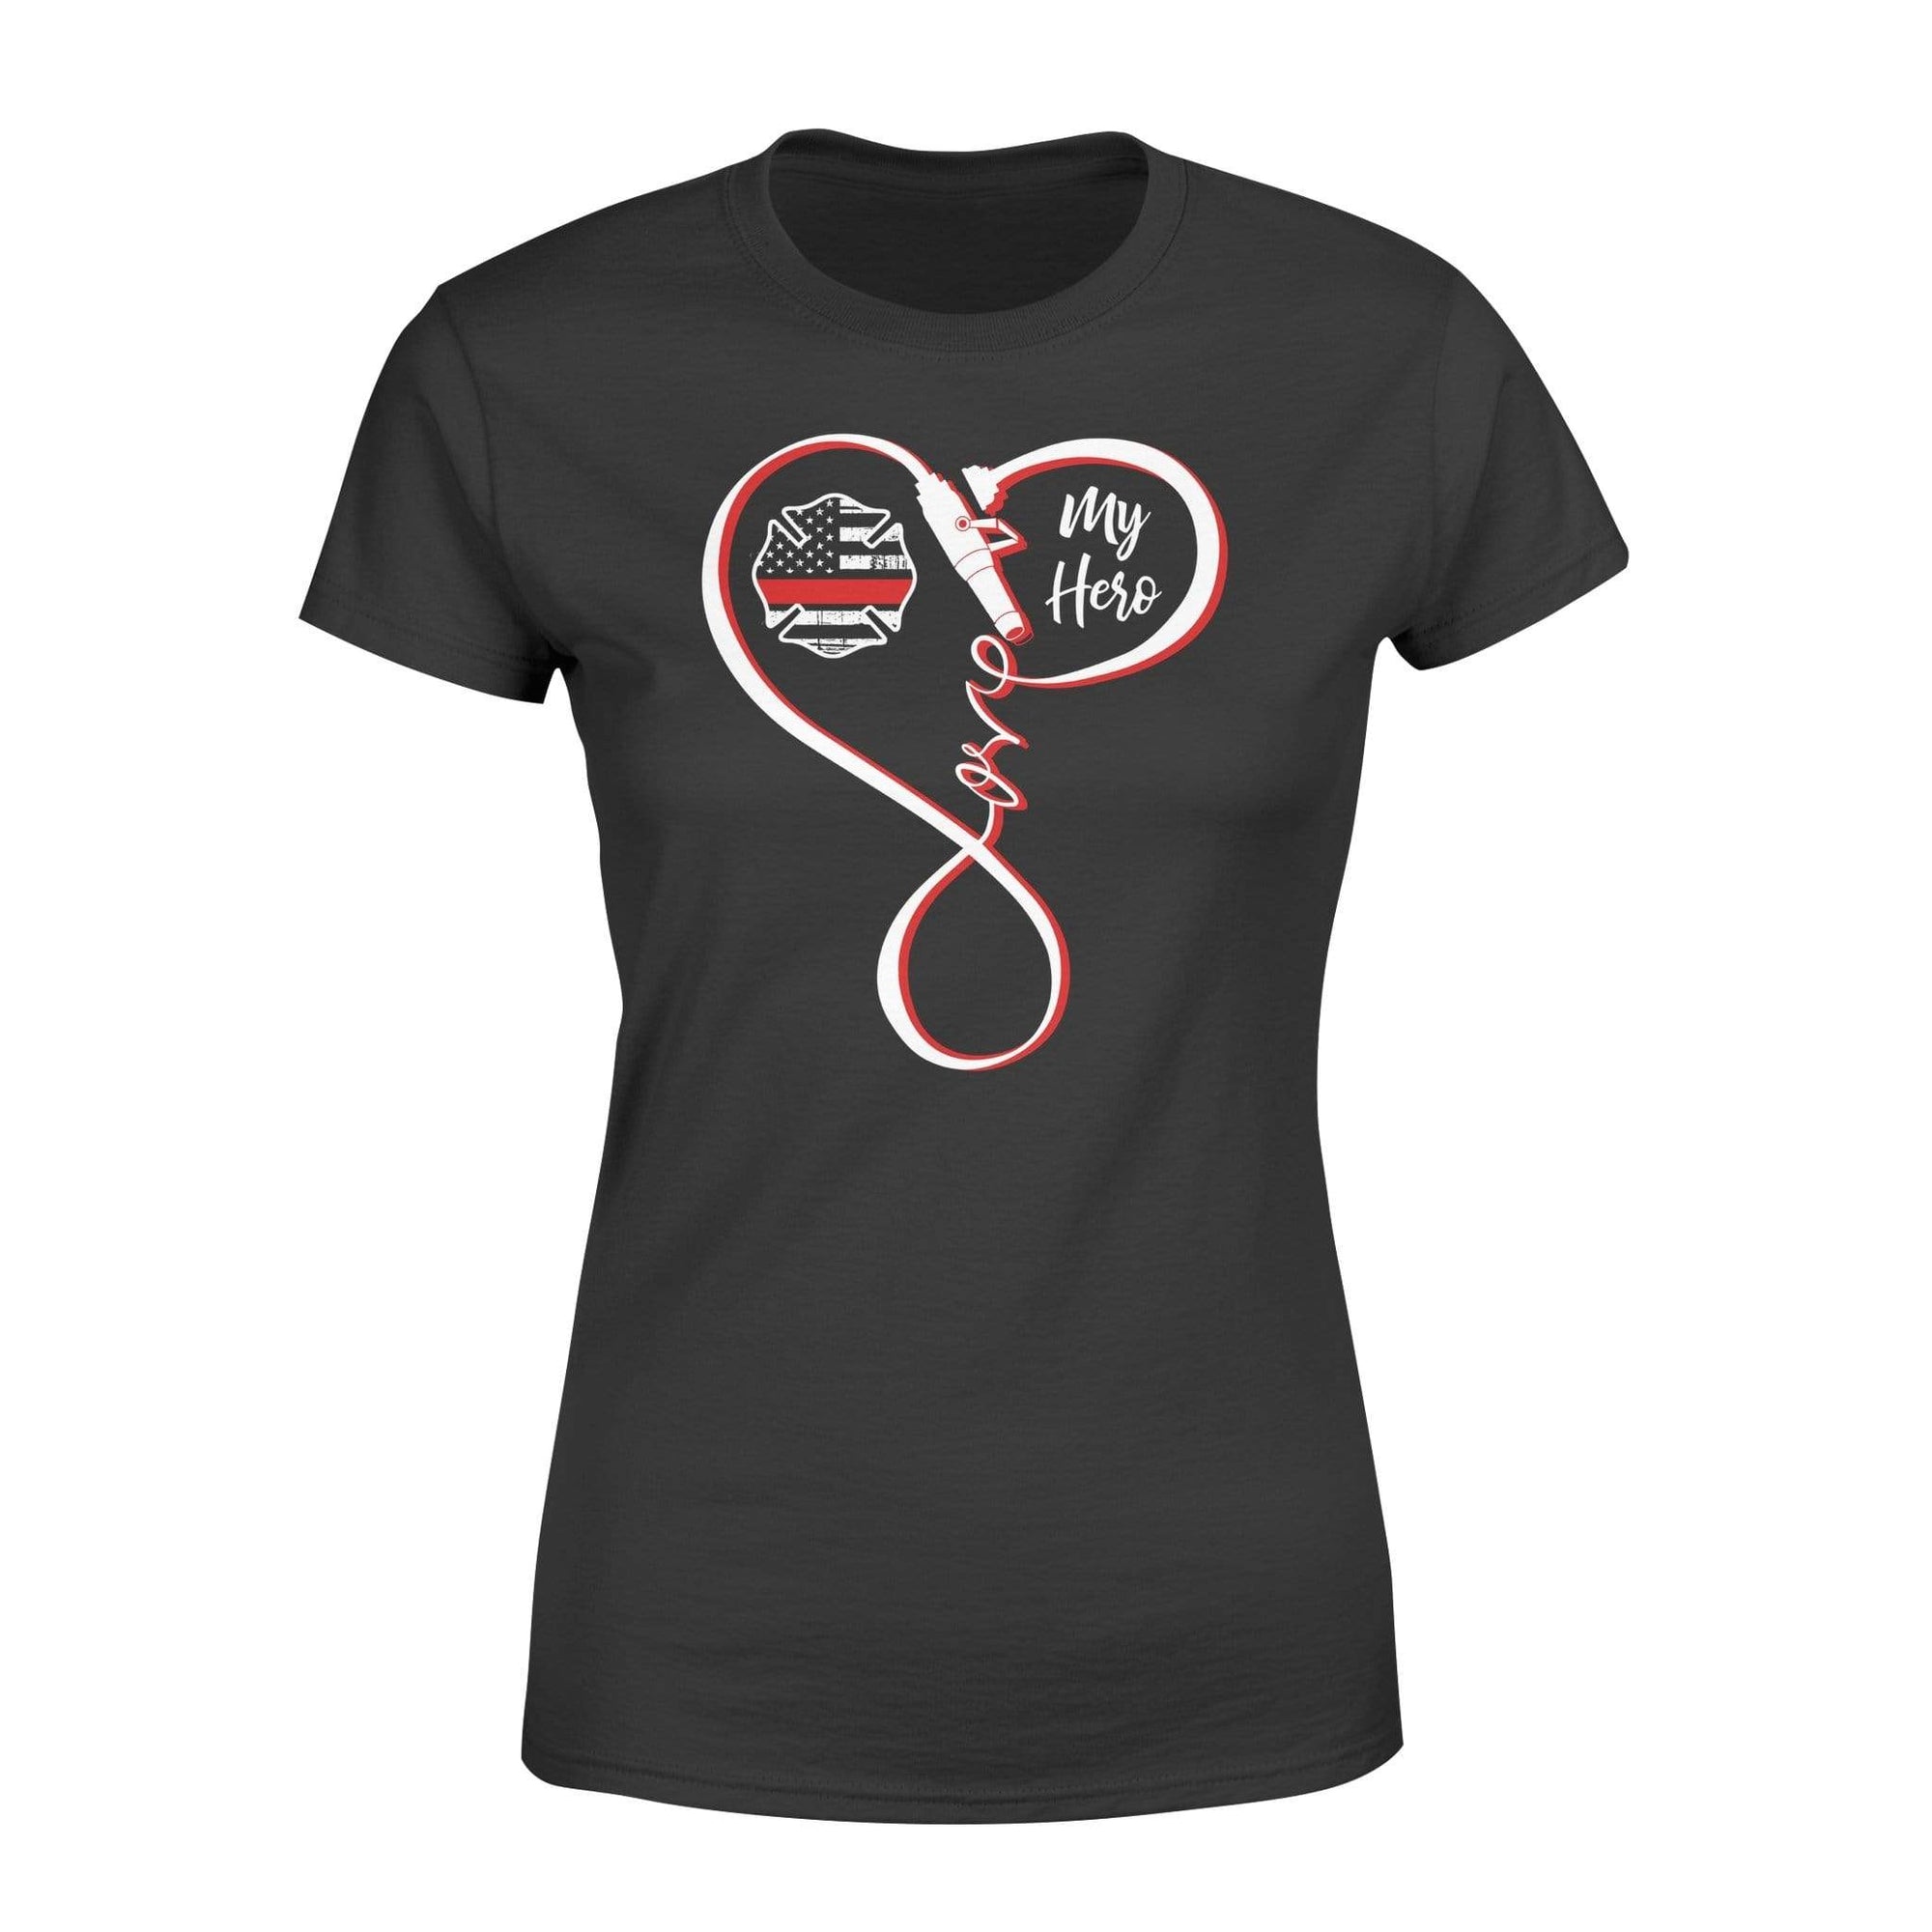 Personalized Shirt - TRL Infinity Love Fire Hose - Love My